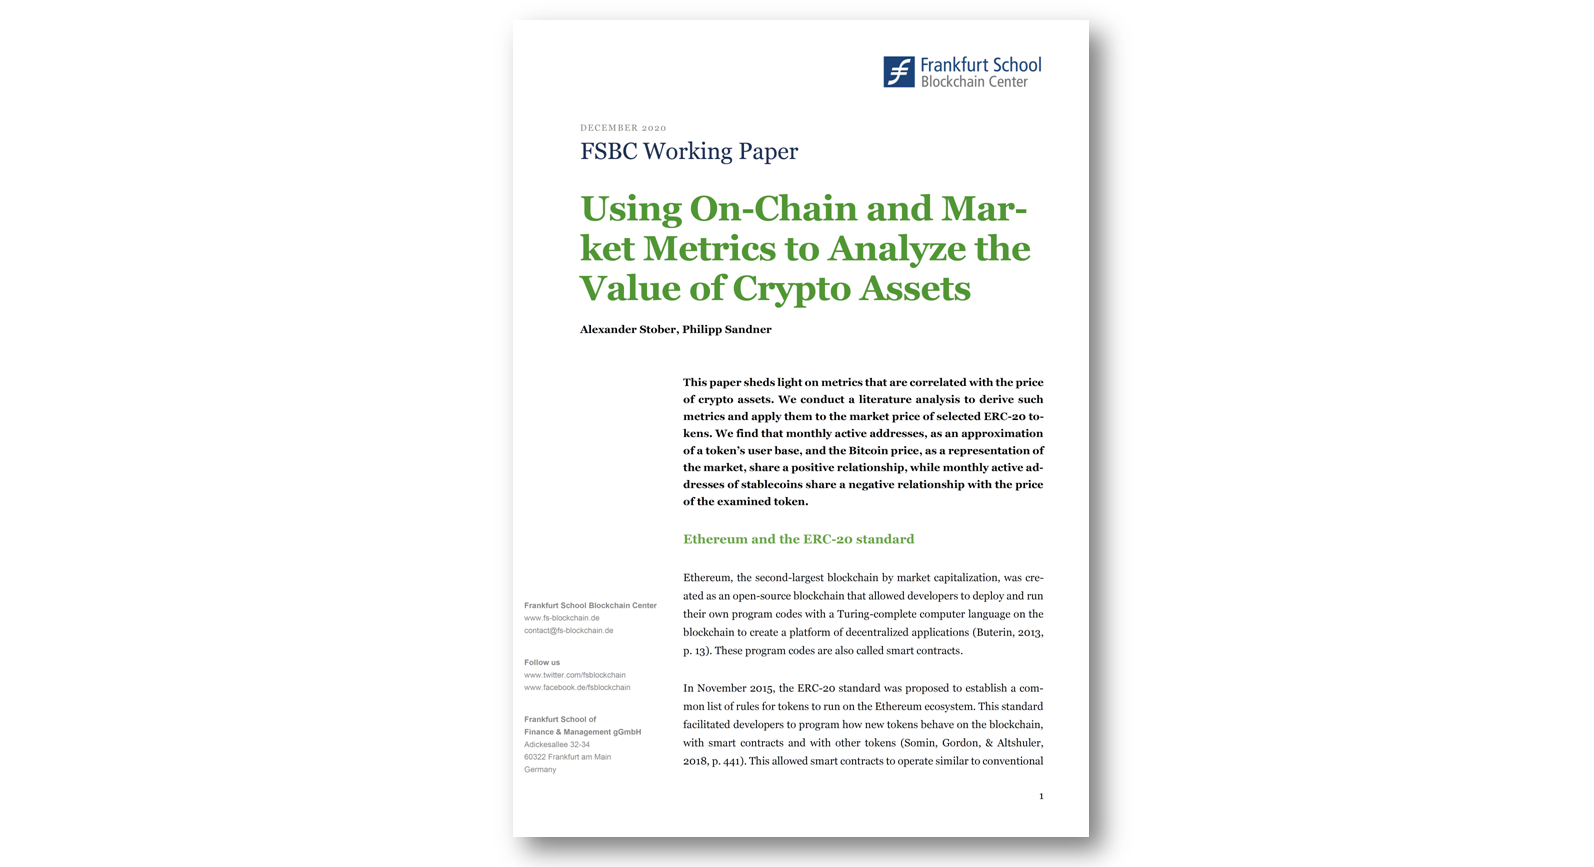 Using On-Chain and Market Metrics to Analyze the Value of Crypto Assets